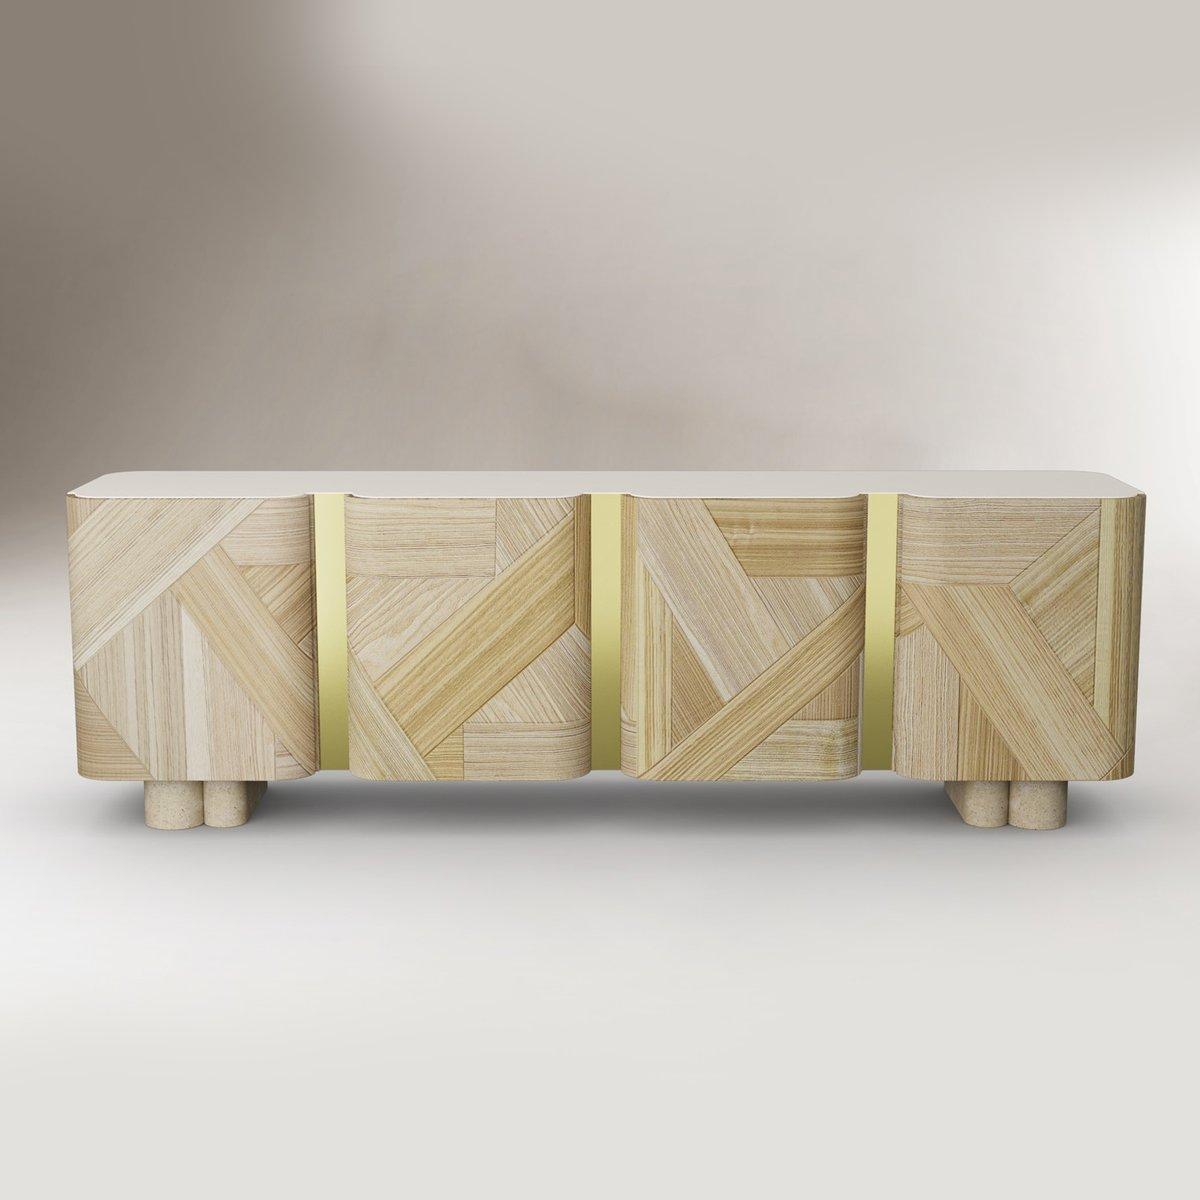 Portuguese Sculpted Contemporary Sideboard by Dooq